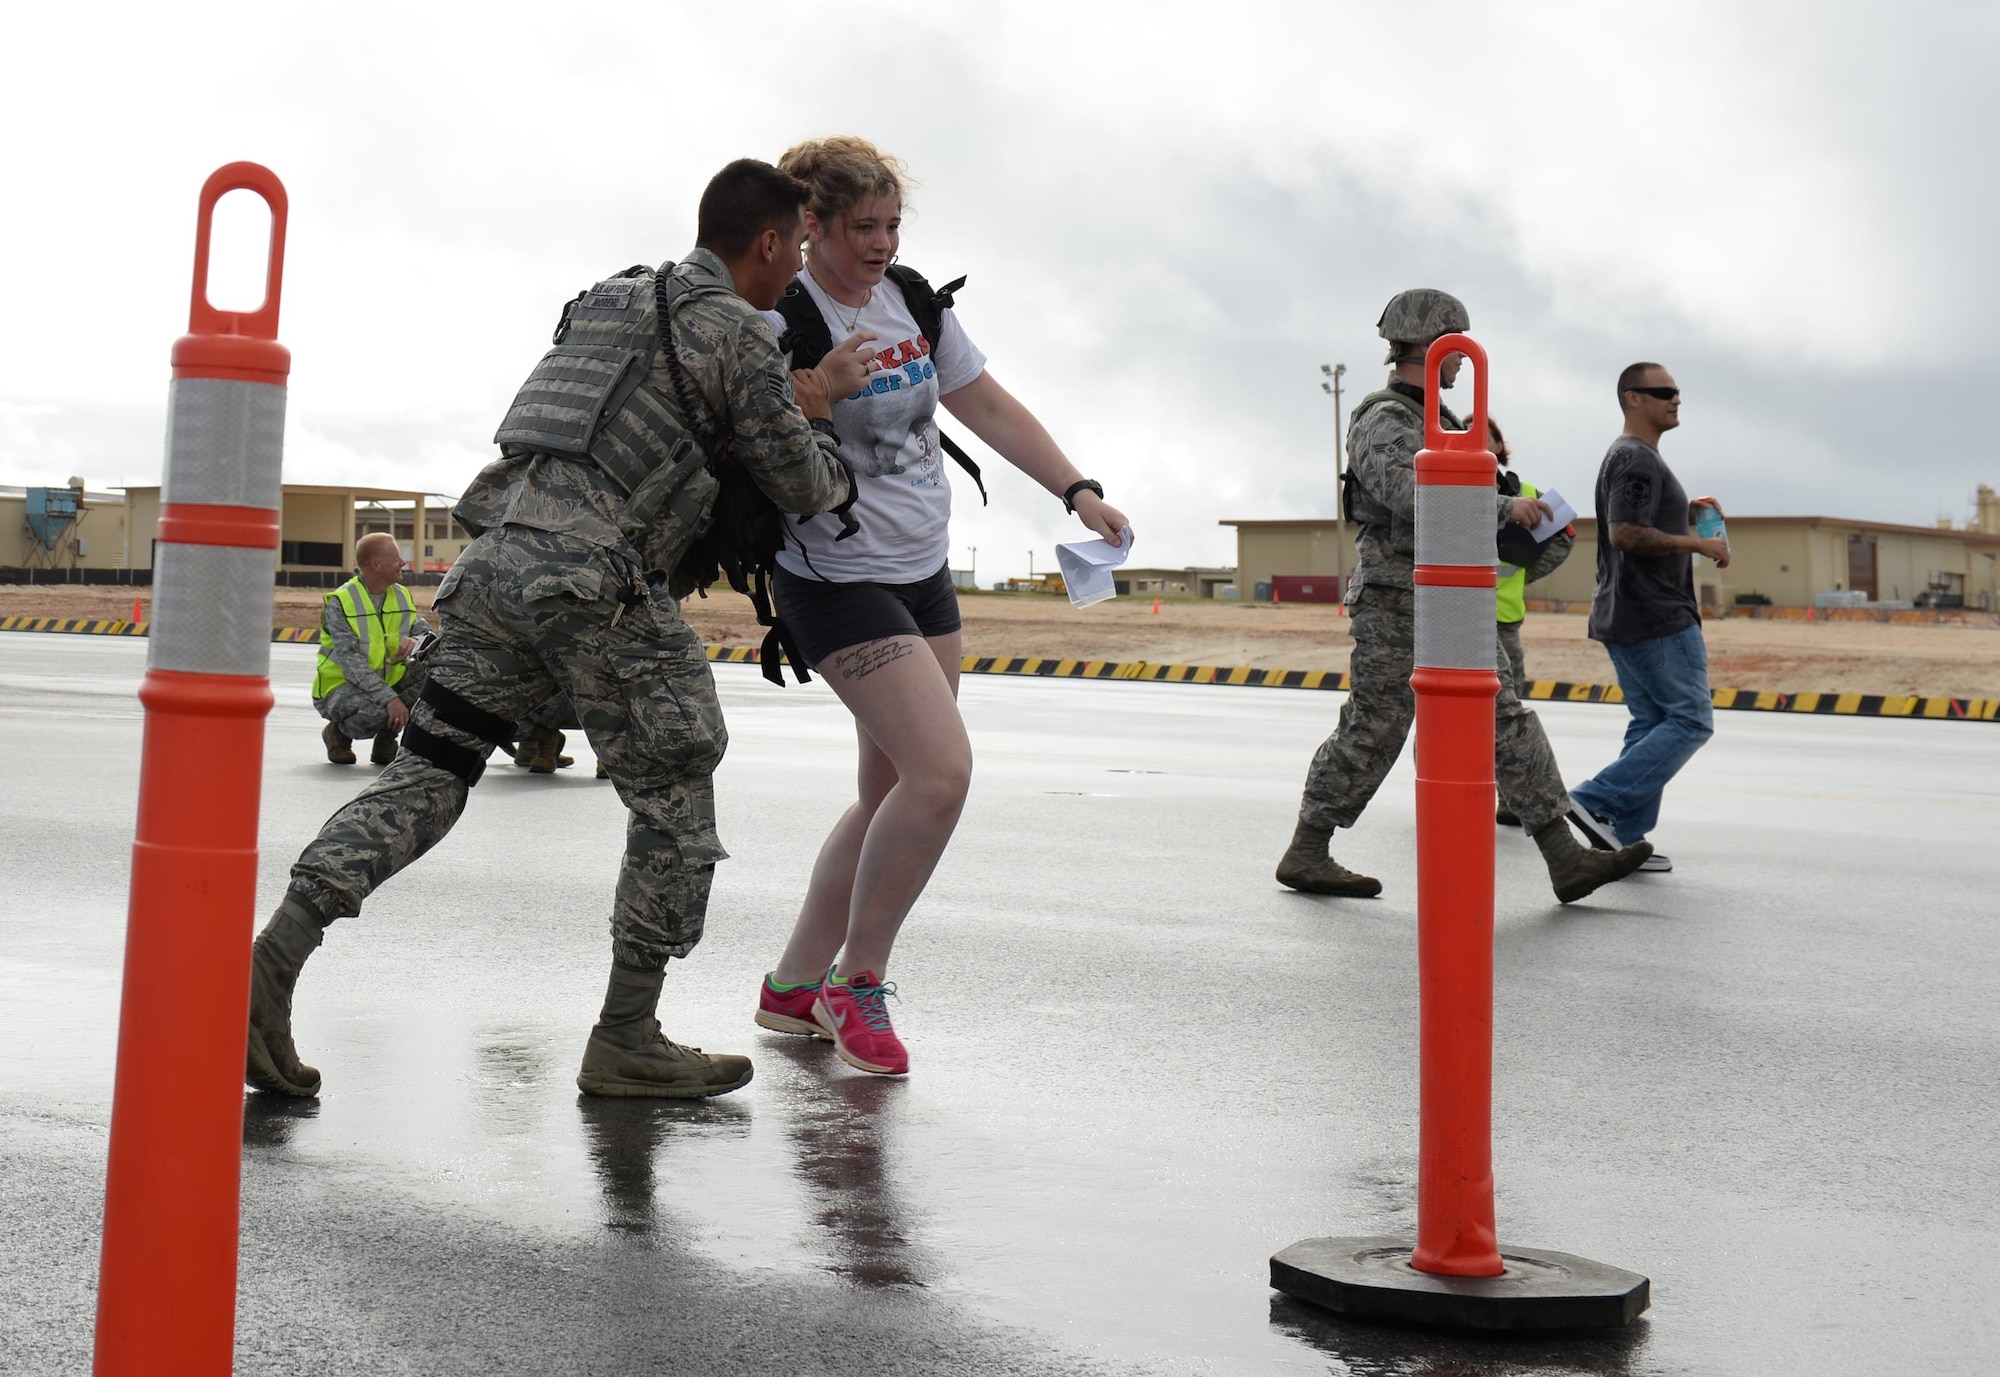 Senior Airman Nicholas Moreno, 36th Security Forces Squadron entry controller, directs an uninjured bystander to a secure location as part of a massive accident response exercise Feb. 3, 2016, at Andersen Air Force Base, Guam. This exercise tested Andersen AFB’s emergency readiness to prepare for the Pacific Air Partners Open House that is scheduled for Feb. 20. (U.S. Air Force photo/Airman 1st Class Jacob Skovo)